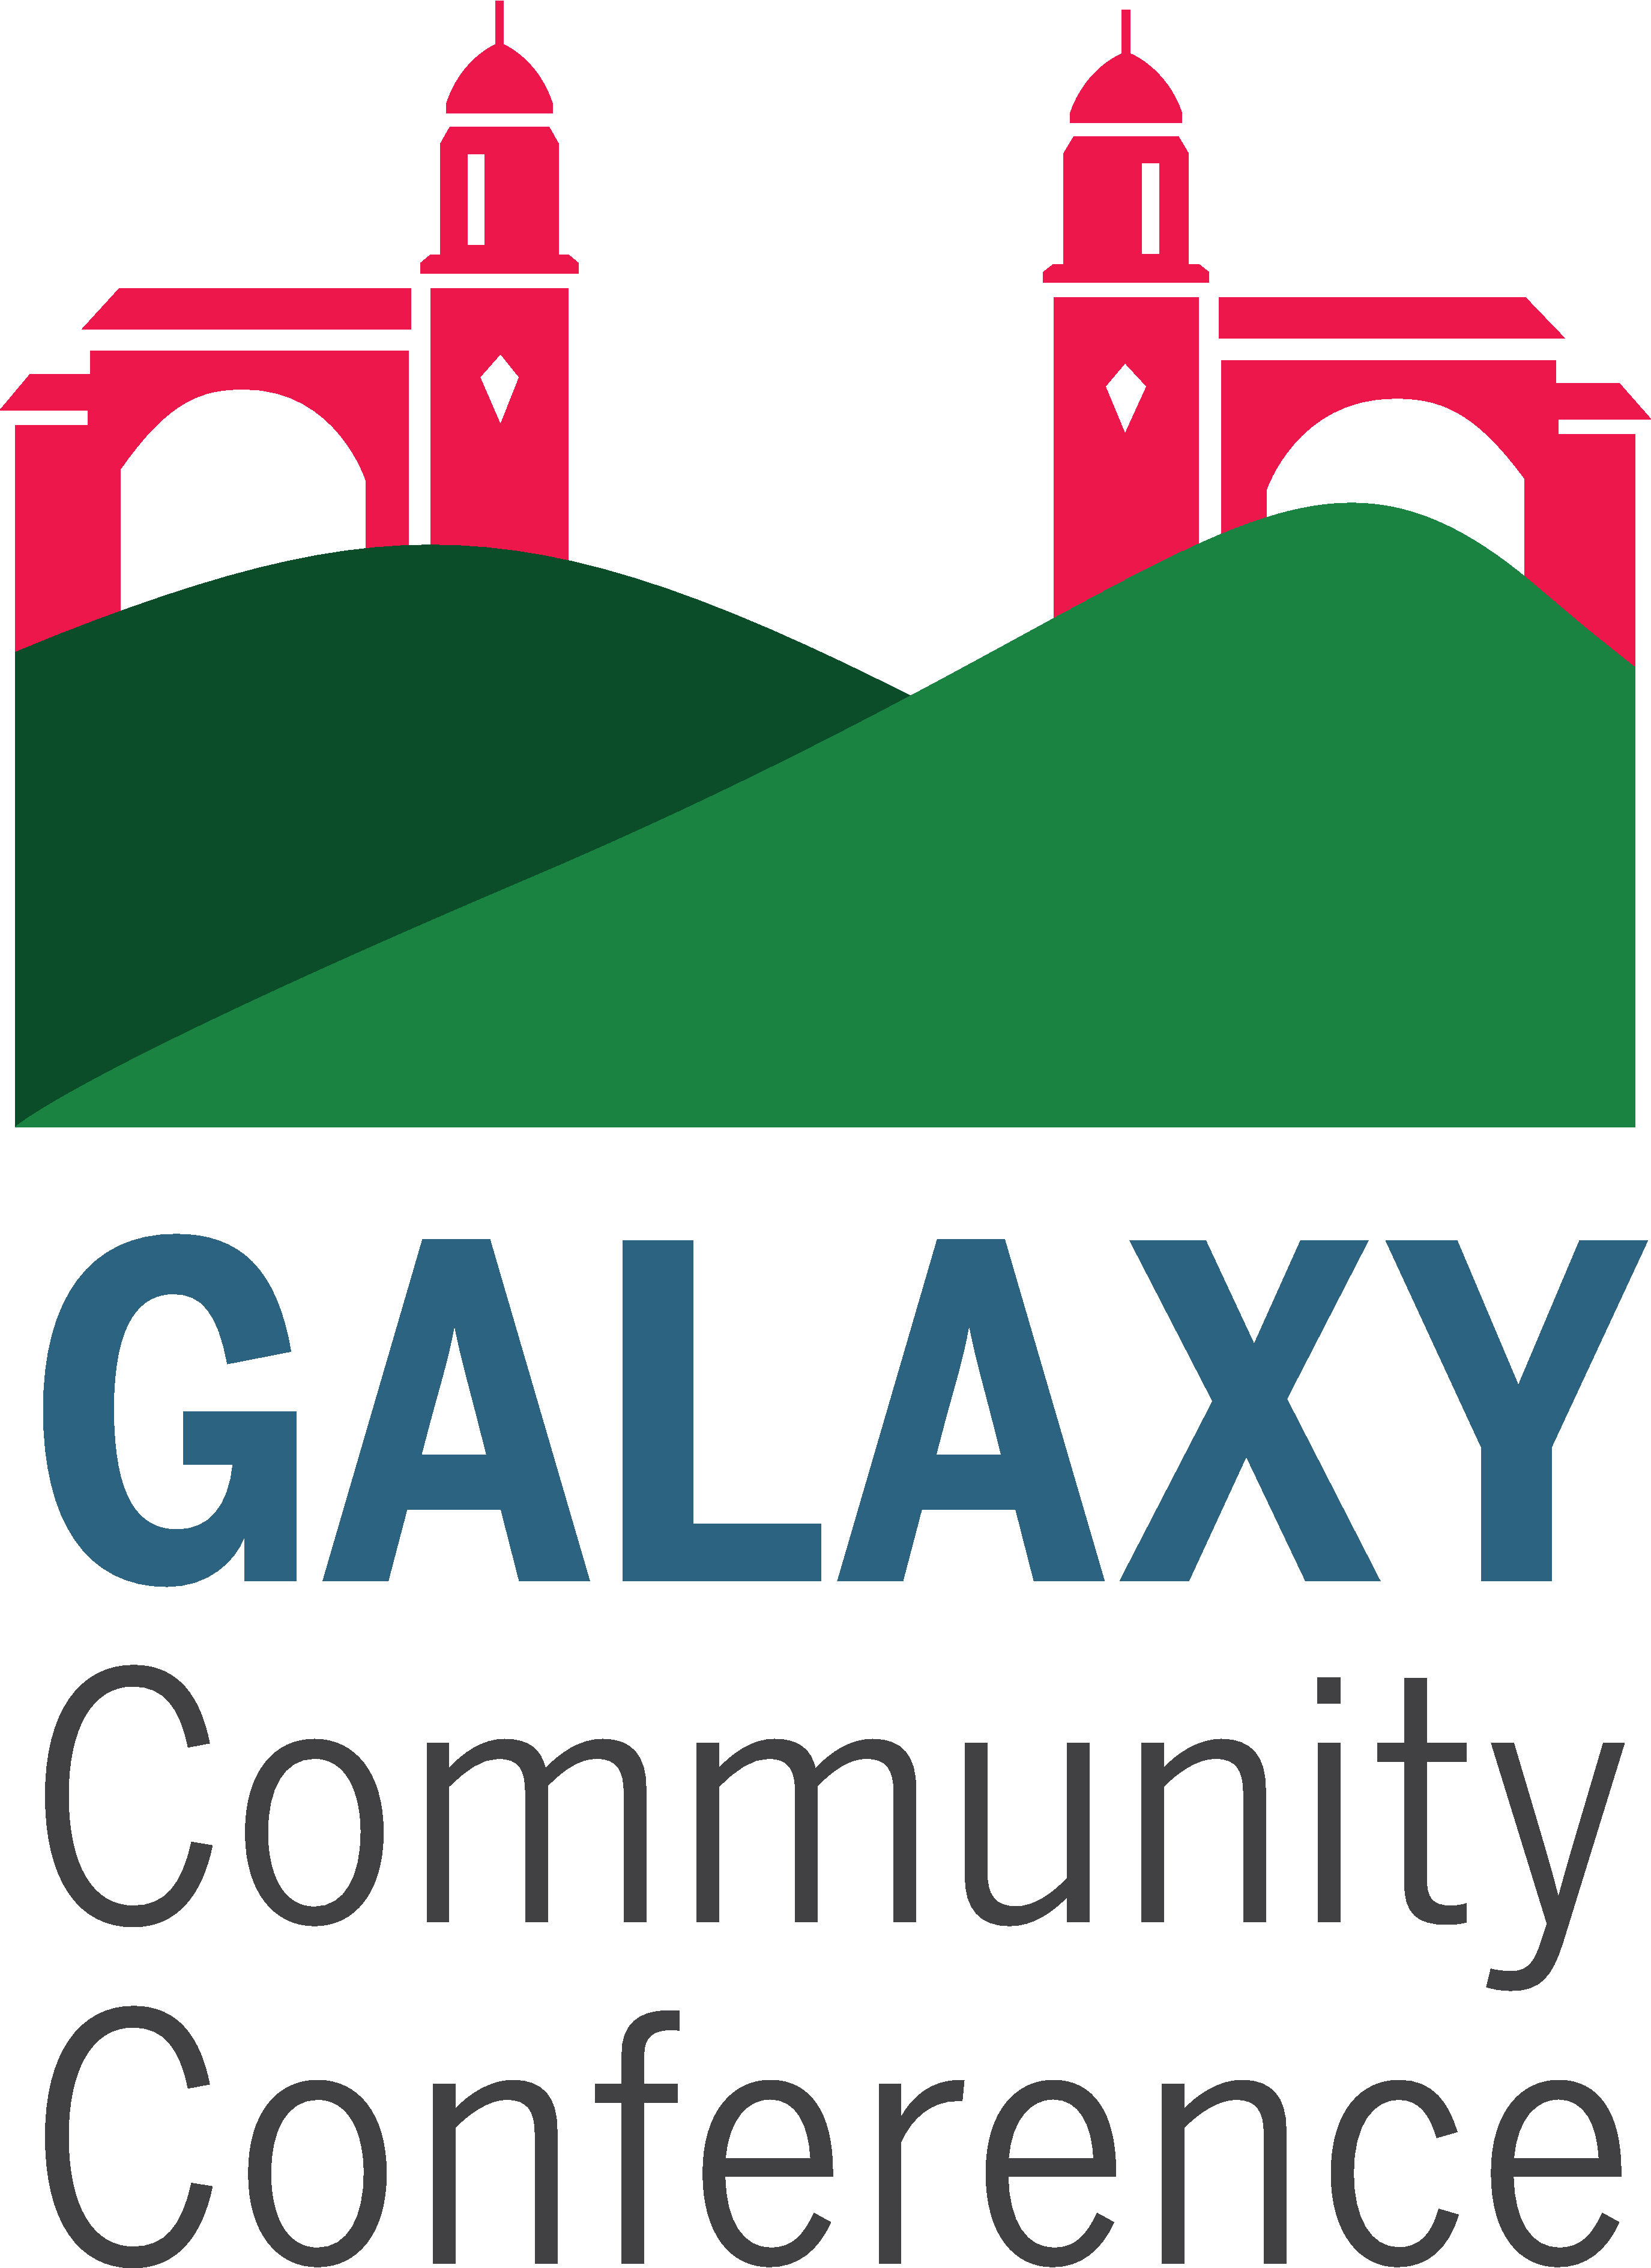 2016 Galaxy Community Conference